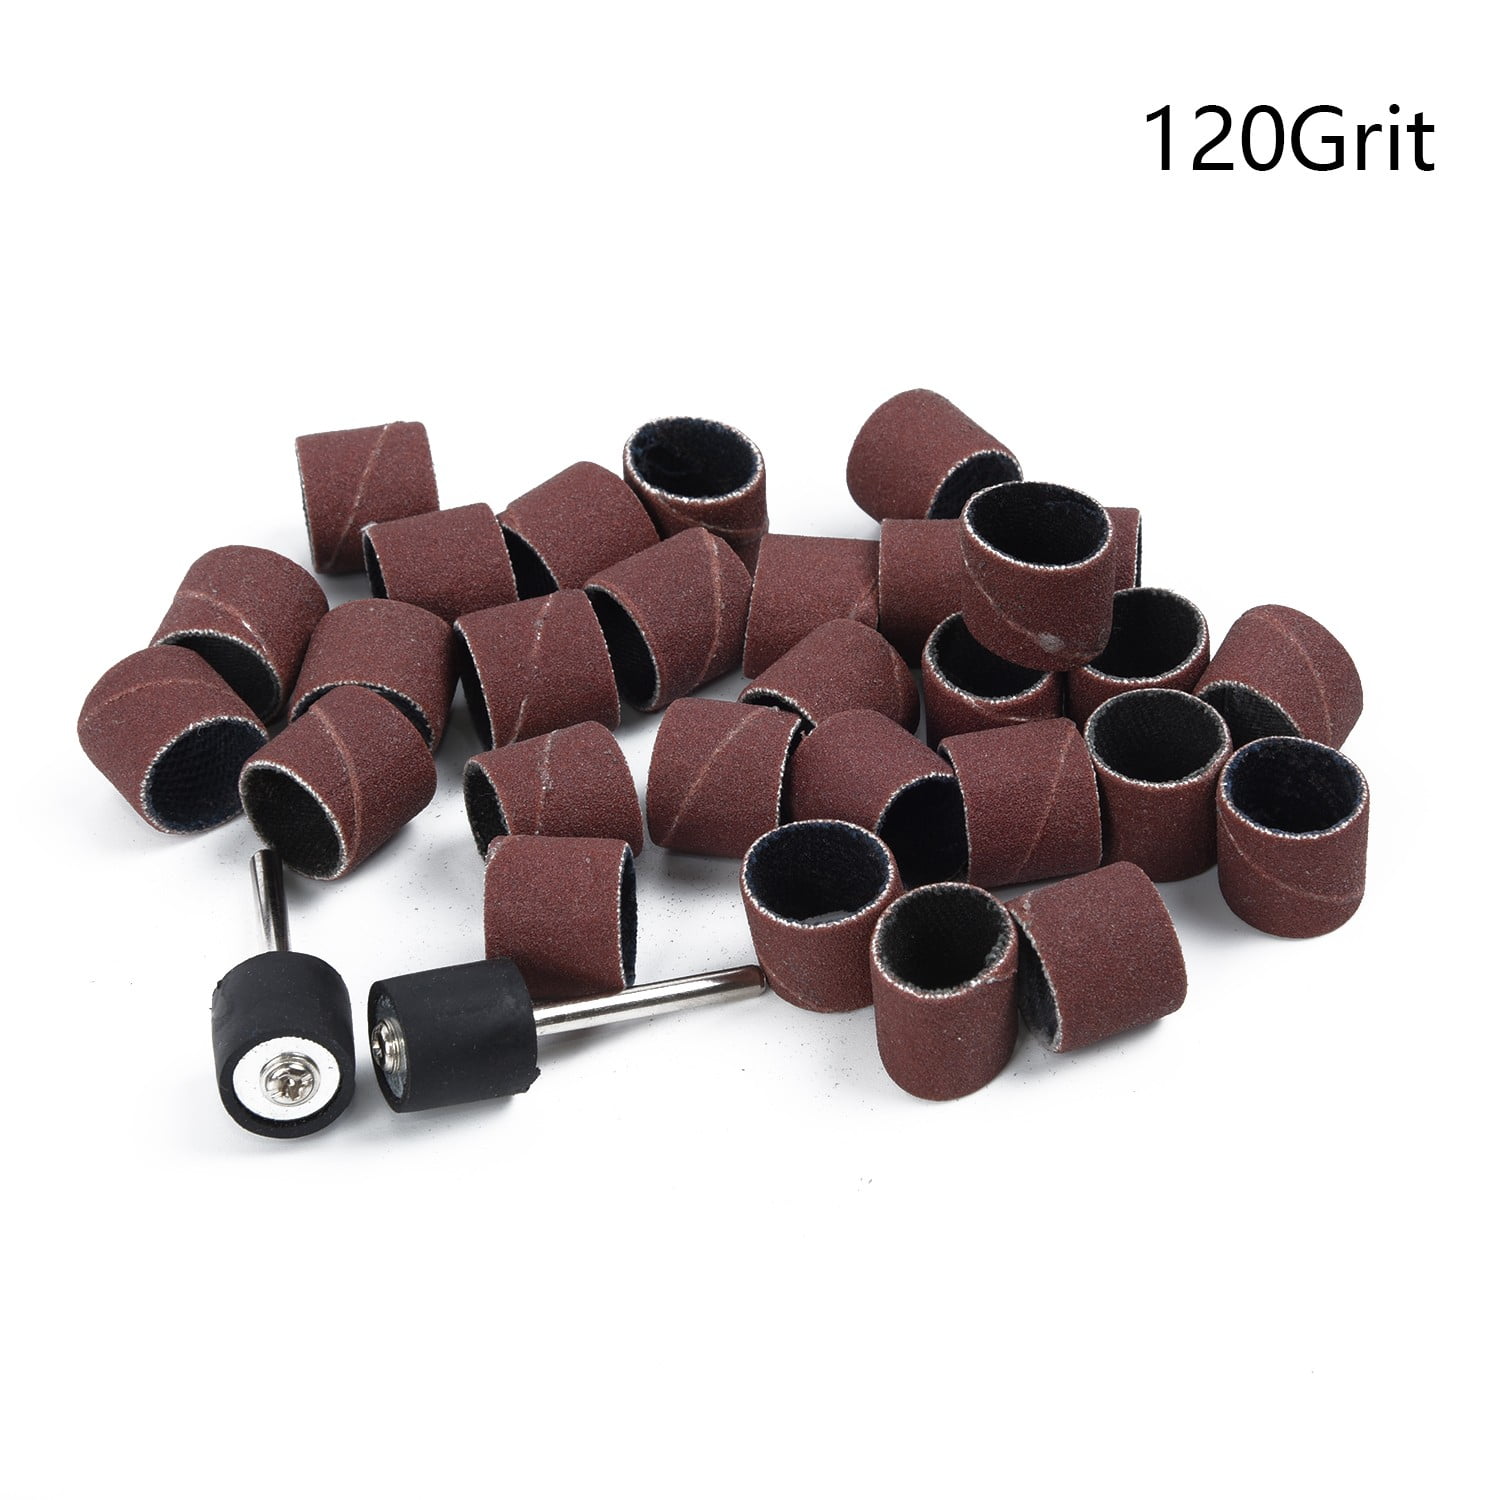 100pc 1/4" 120 Grit Sanding Drum Sleeves+2 Rubber Mandrel Fit For Rotary Tool ht